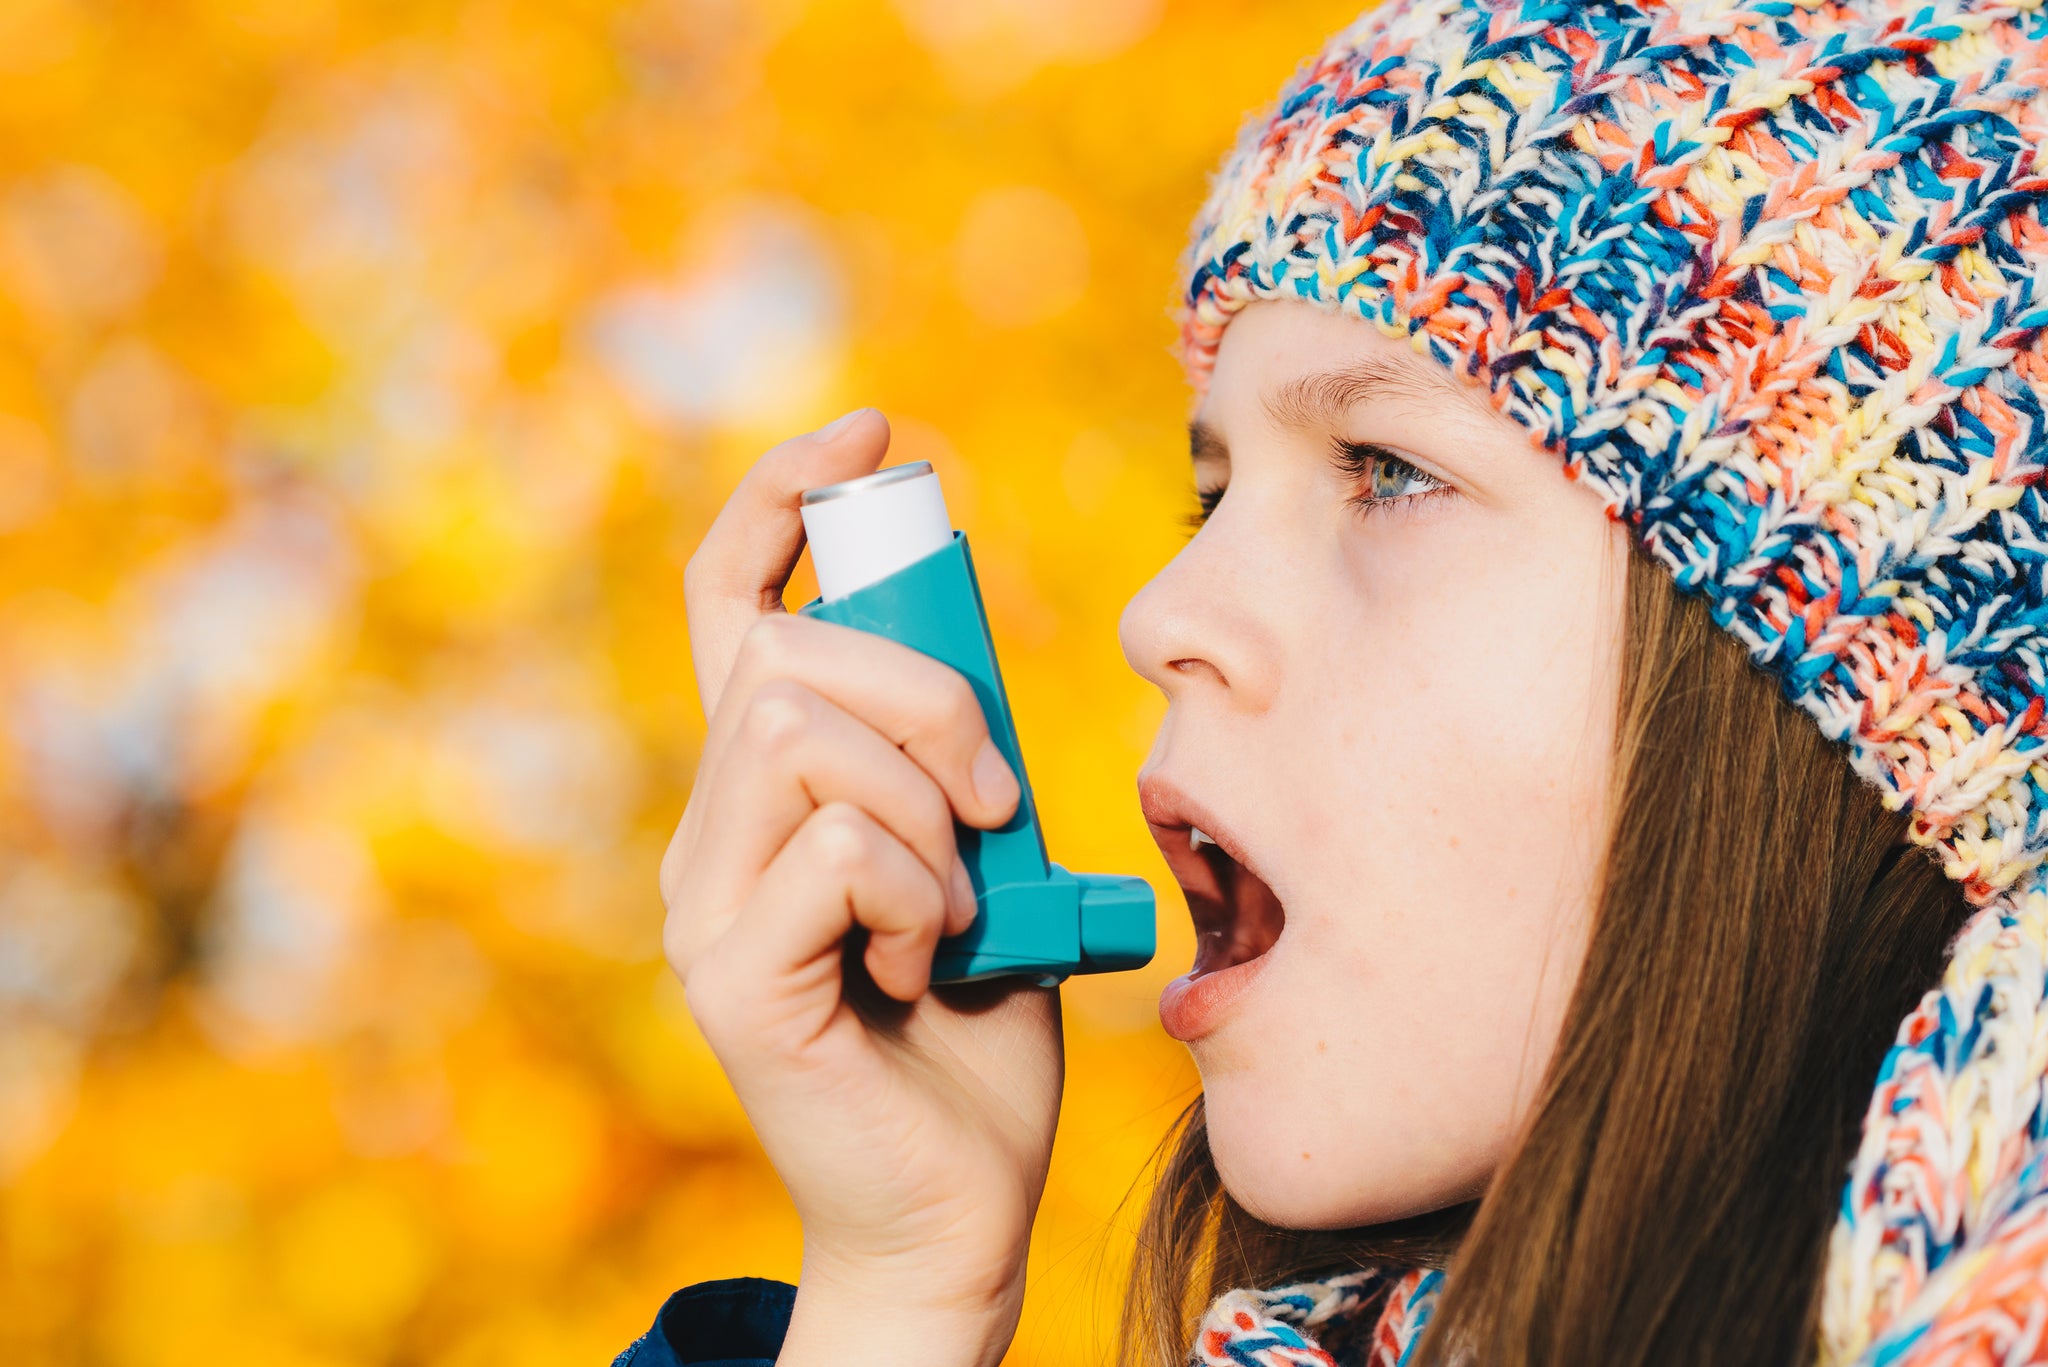 Smaller Particle Pollution Found to Have Greater Association With Childhood Asthma